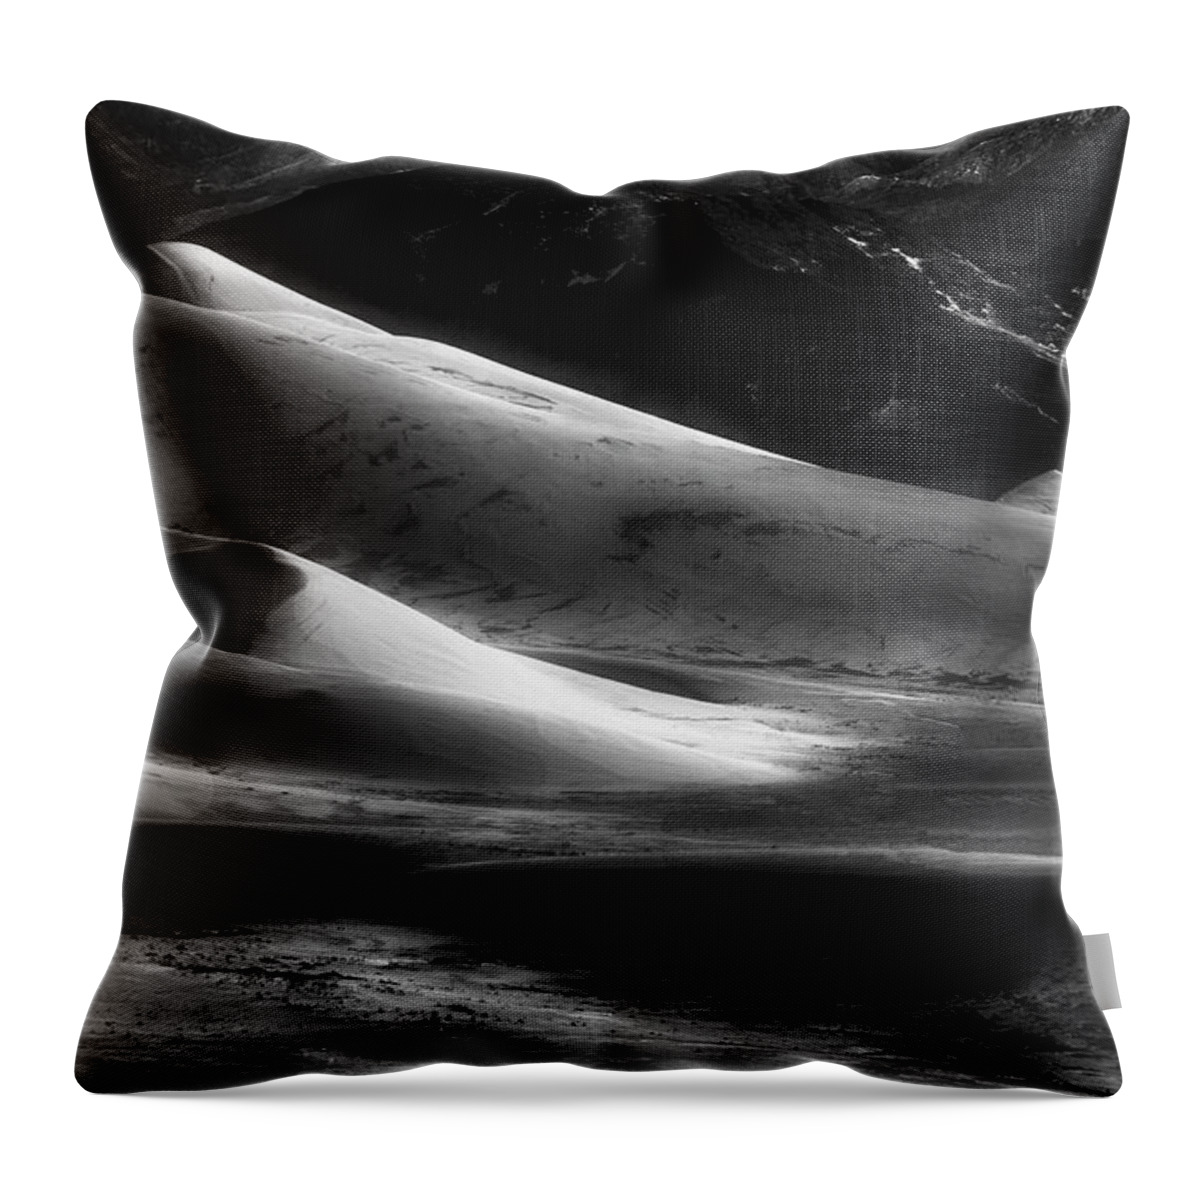 Sand Throw Pillow featuring the photograph Desert Shadows by Mike Lang